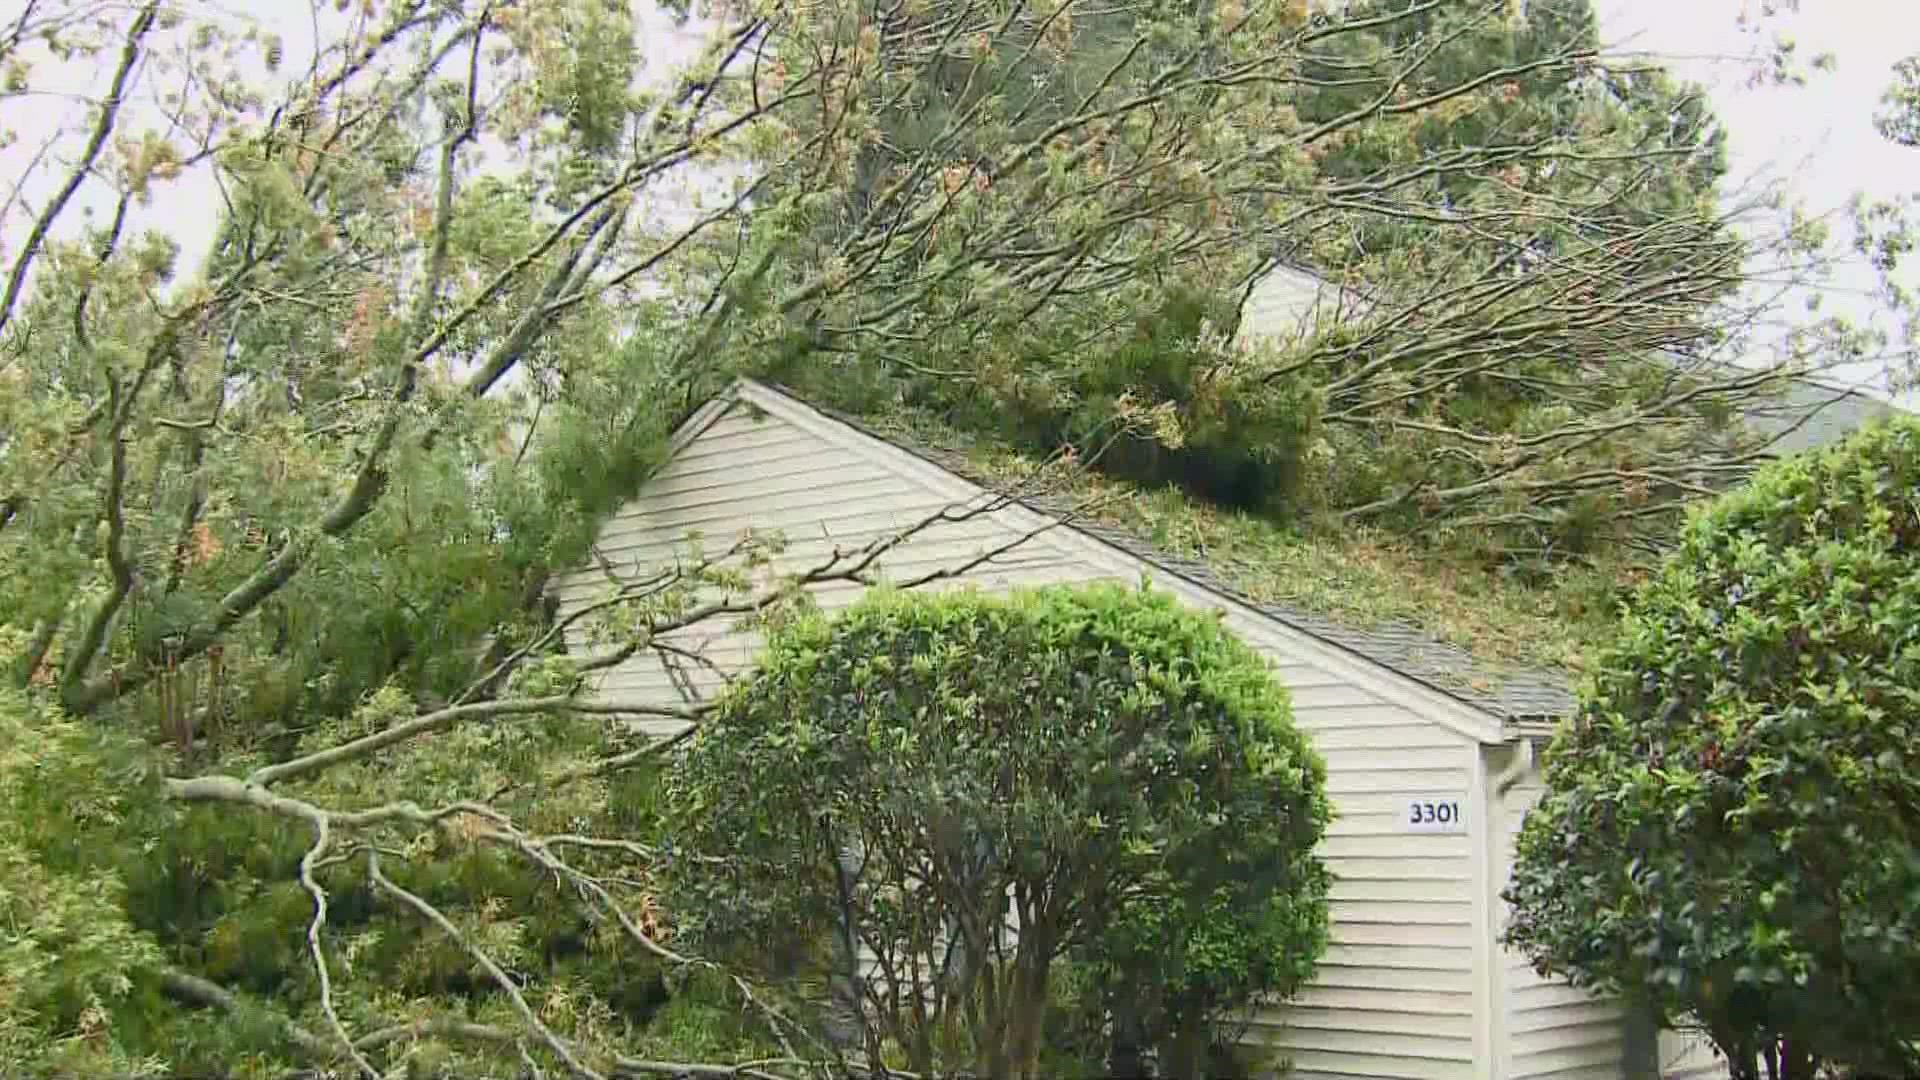 Blustering wind gusts knocked a tree onto a home in Greensboro. Fire officials said it caused significant damage to the roof.